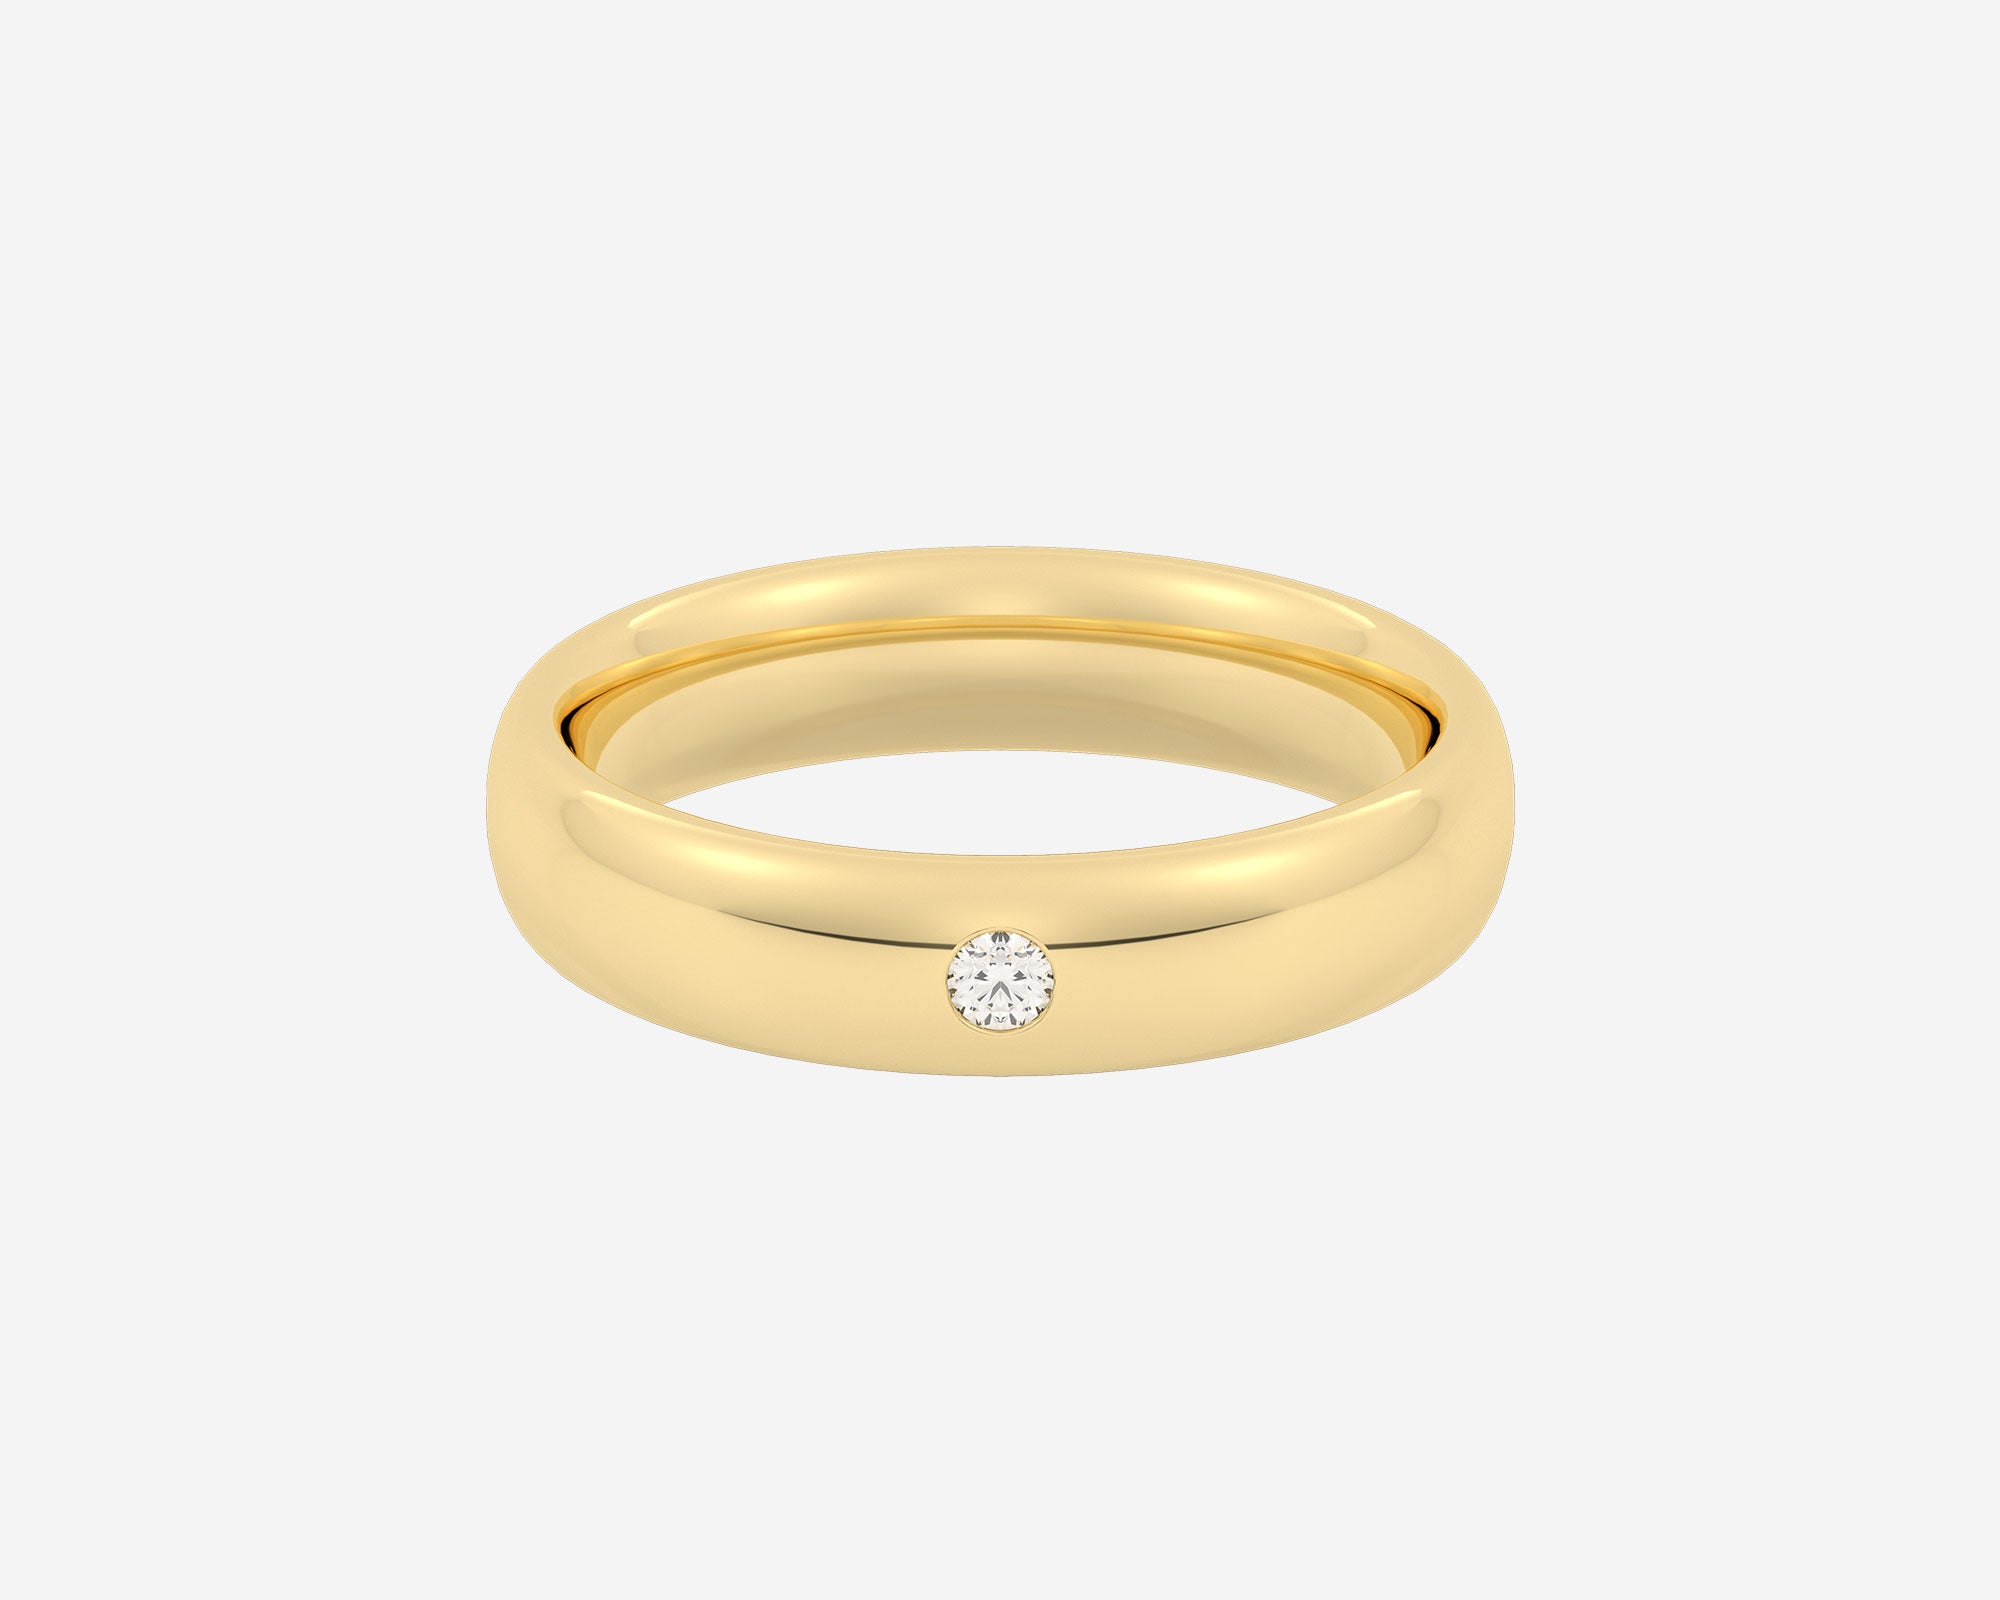 Rounded Wedding Band For Him & Her – Shiree Odiz